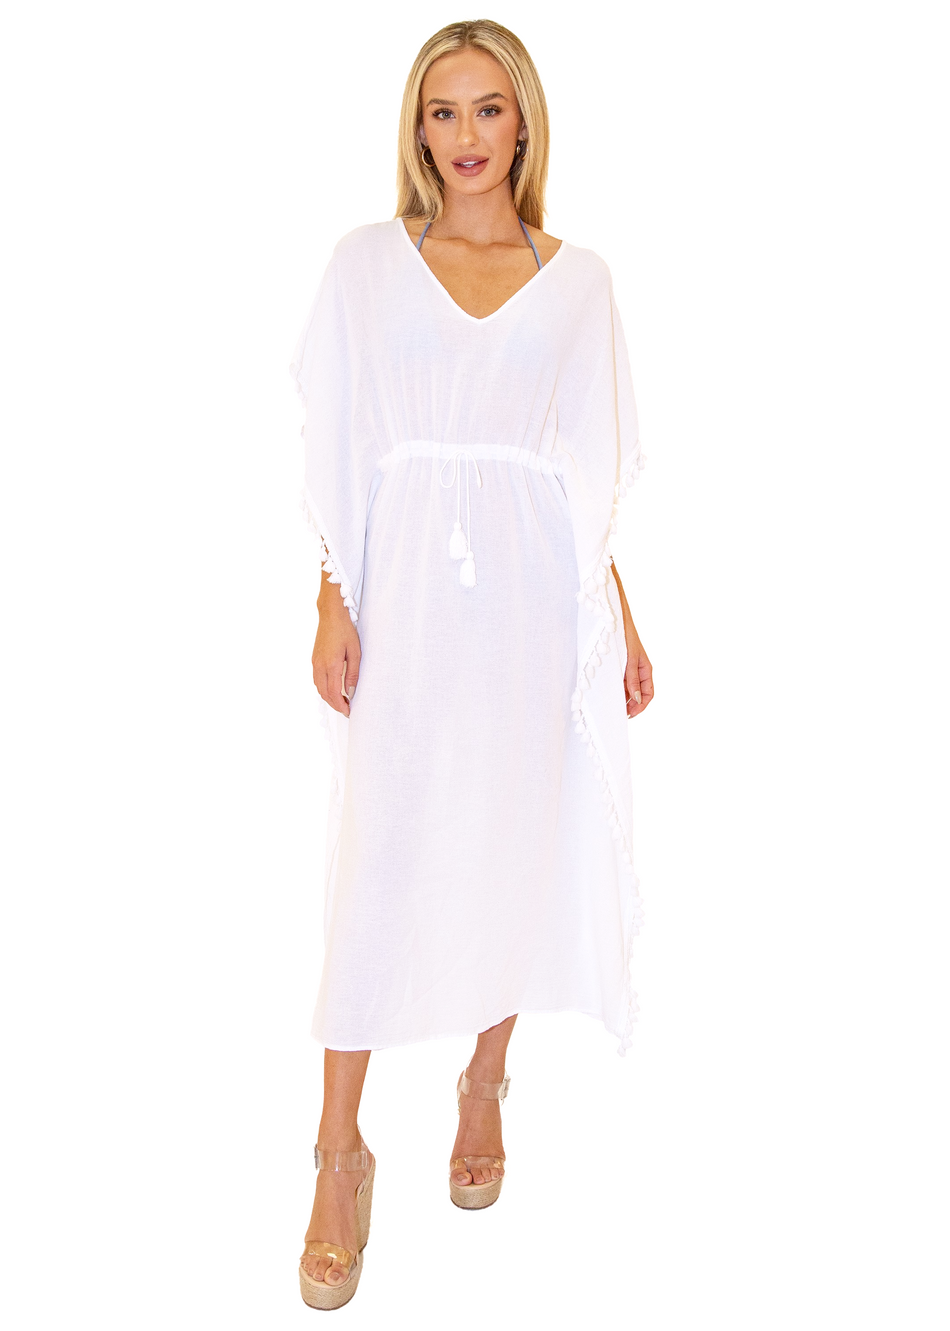 NW1251 - White Cotton Cover-Up